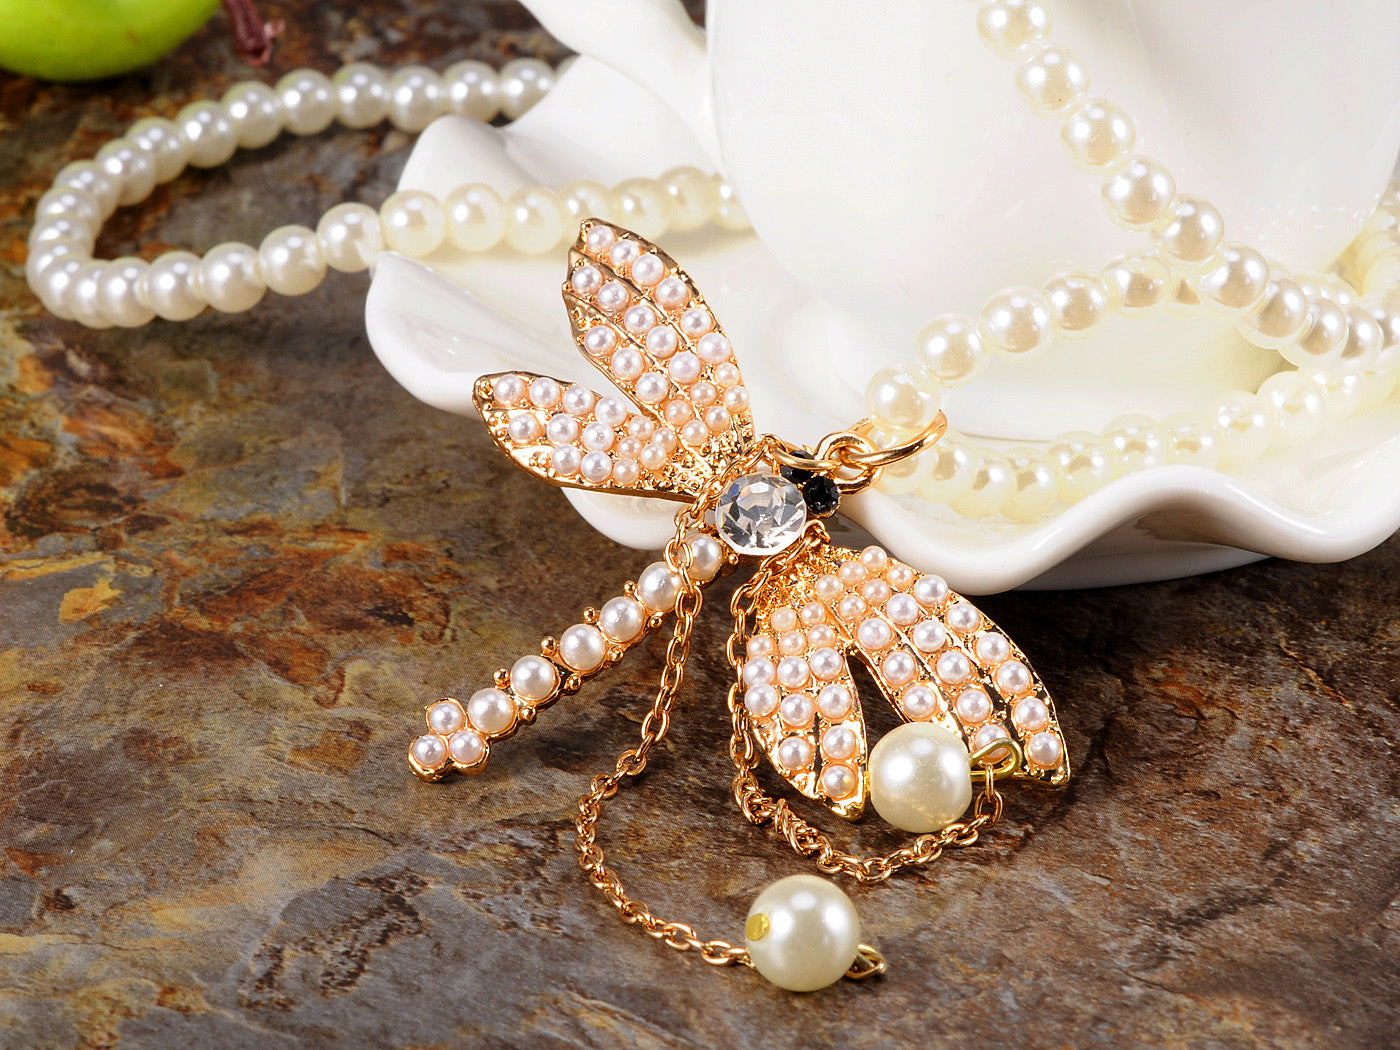 Pearl Like Beaded Cream Pastel Pink Dragonfly Insect Bridal Big Pendant Necklace